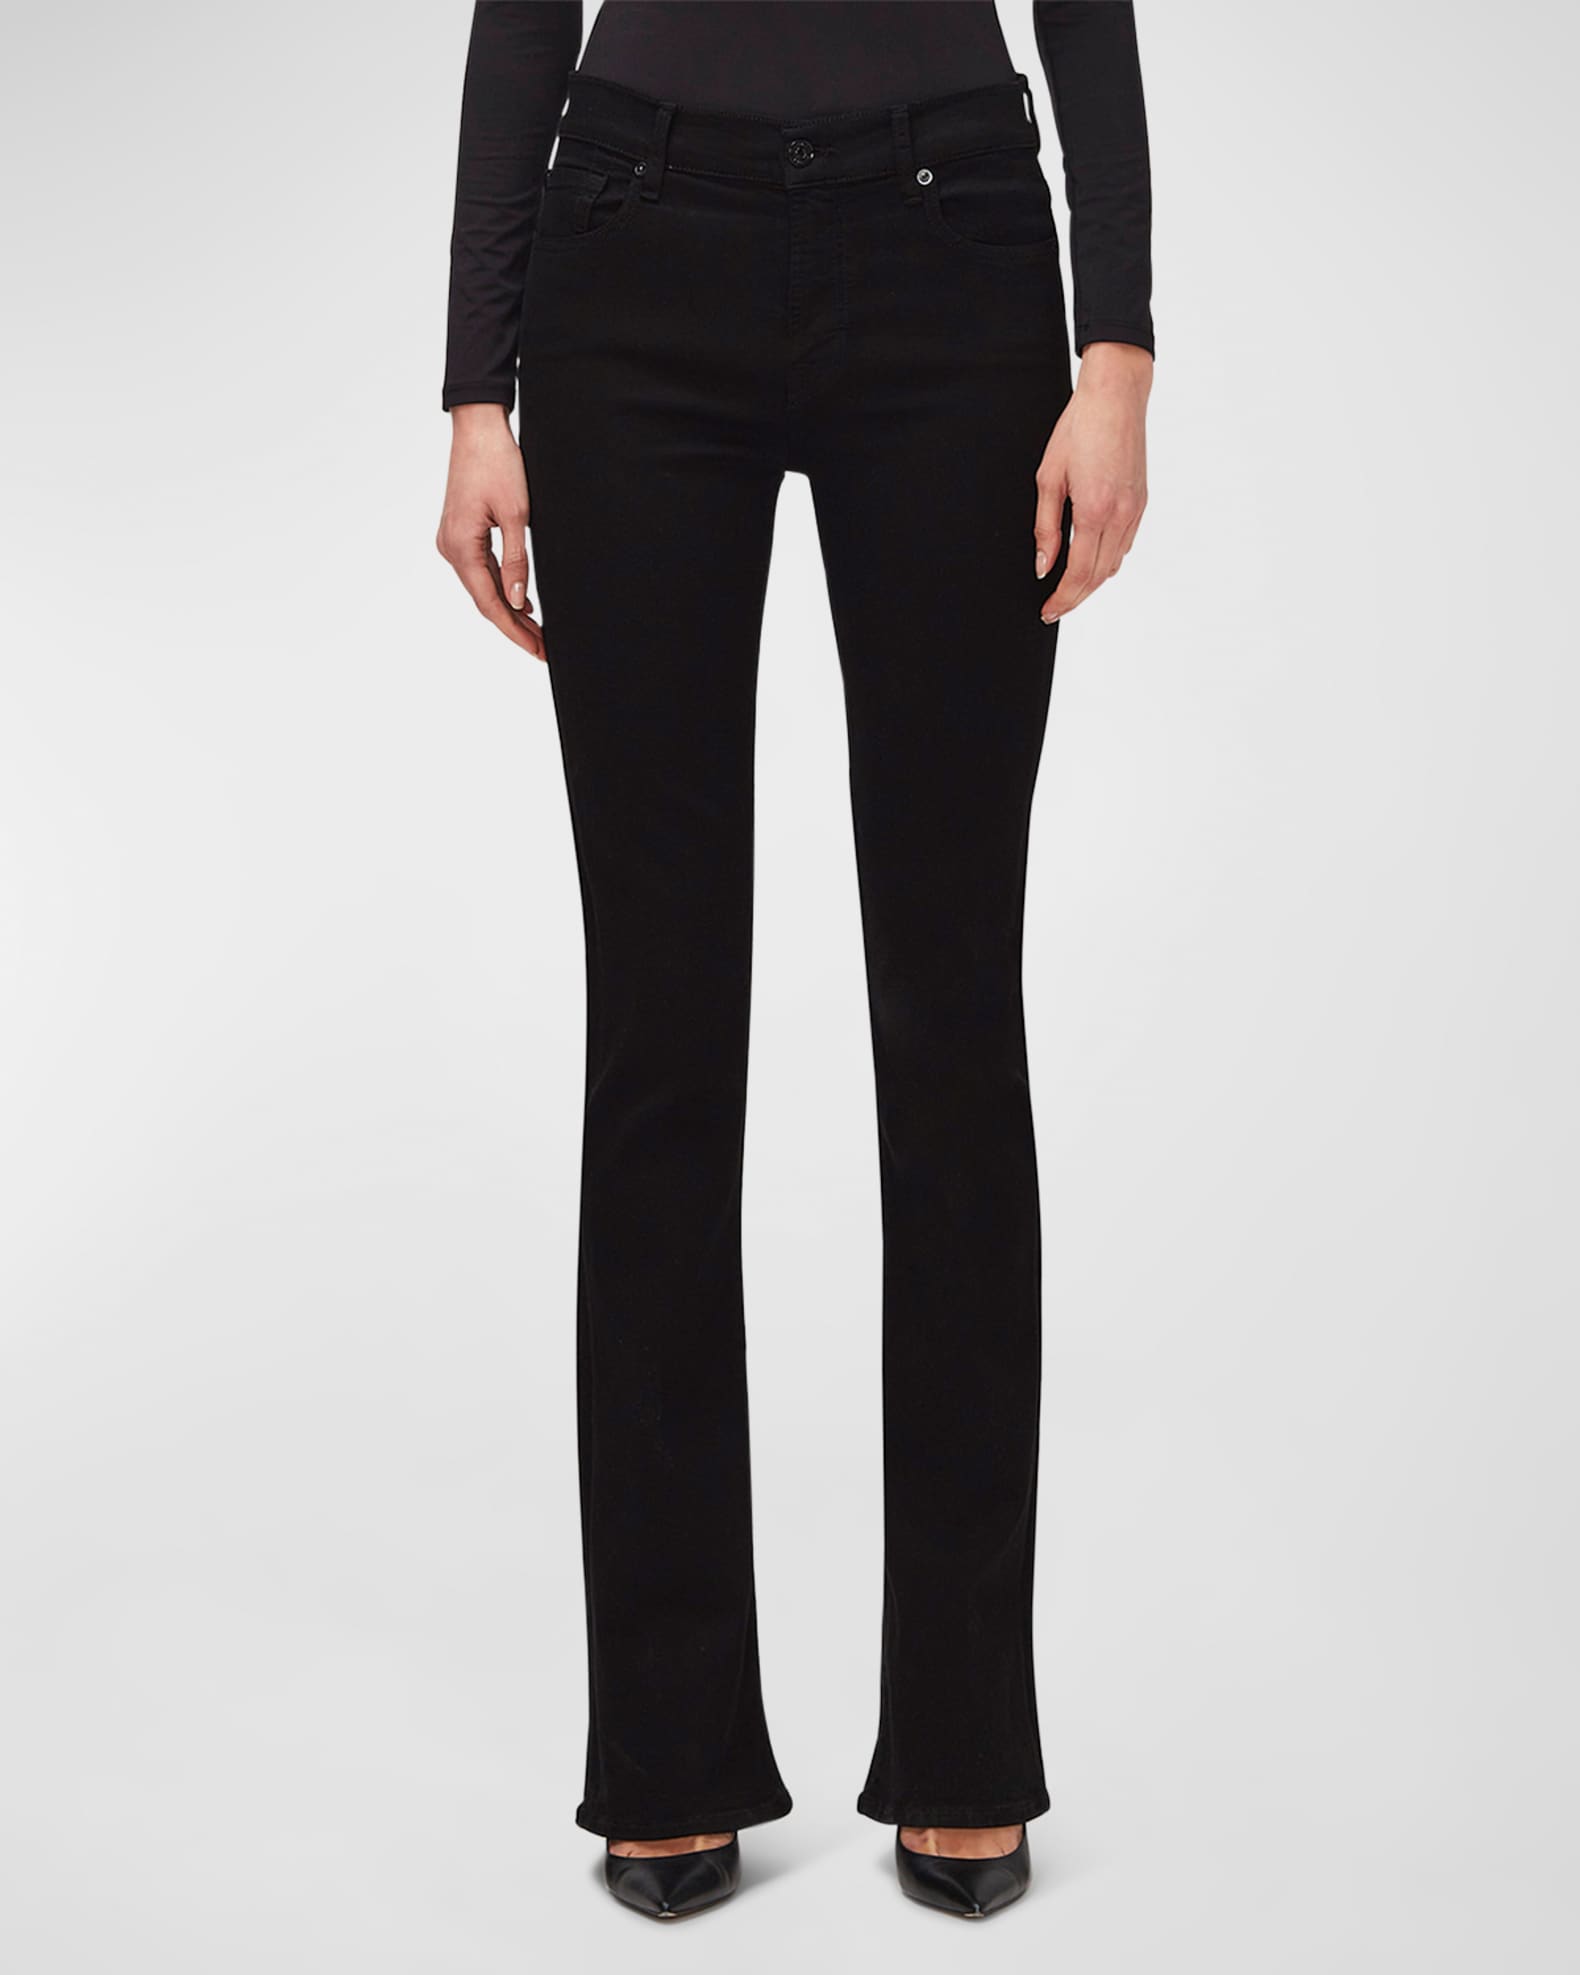 7 for all mankind Kimmie Slim Bootcut Jeans | Neiman Marcus